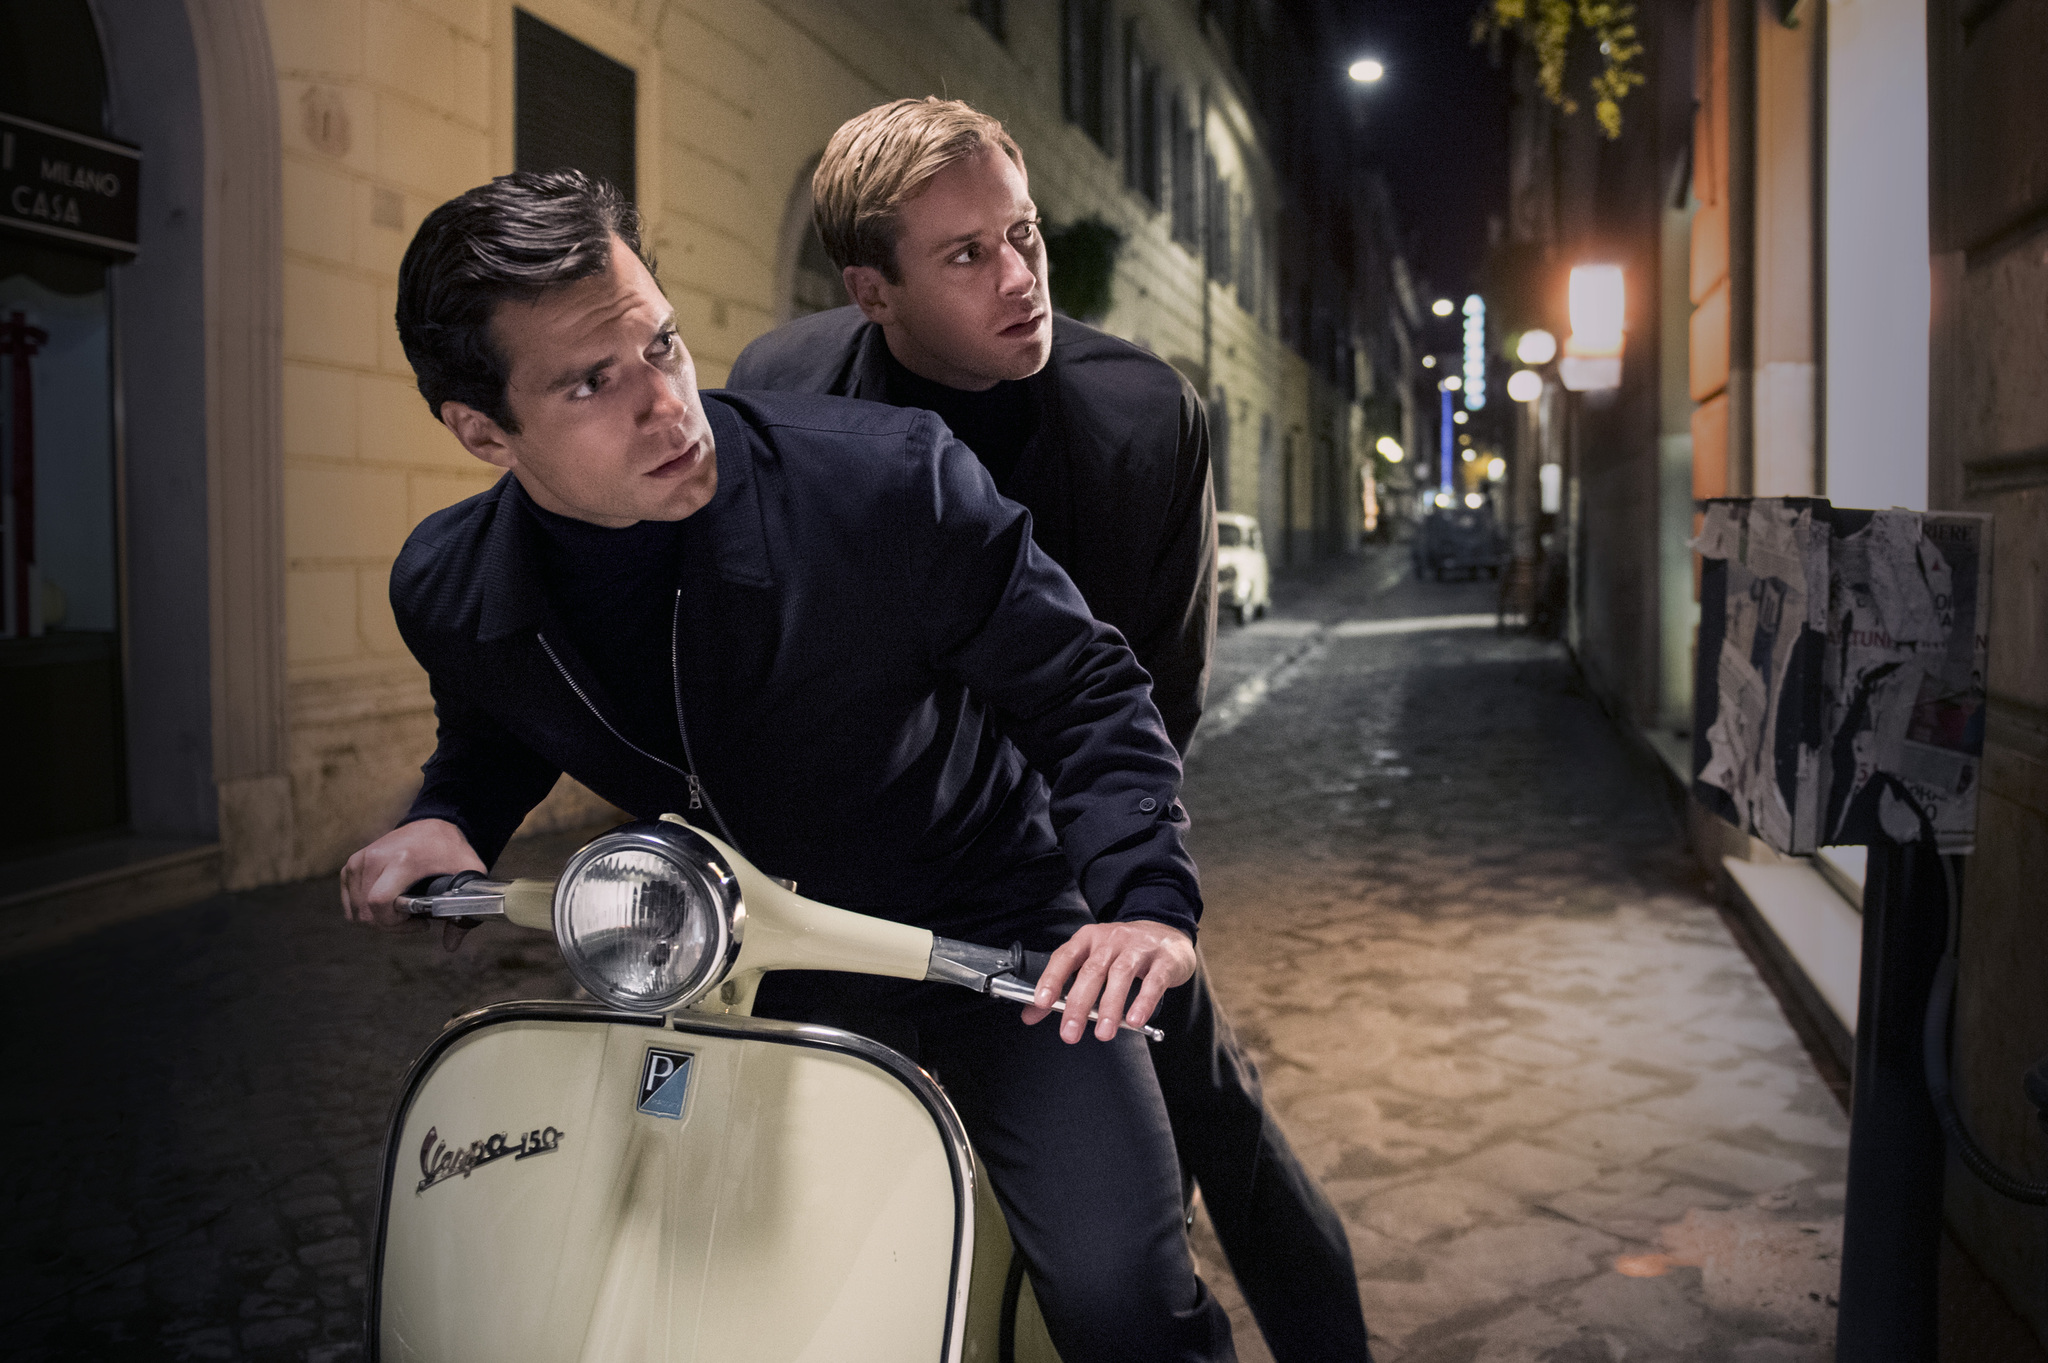 Still of Henry Cavill and Armie Hammer in Snipas is U.N.C.L.E. (2015)